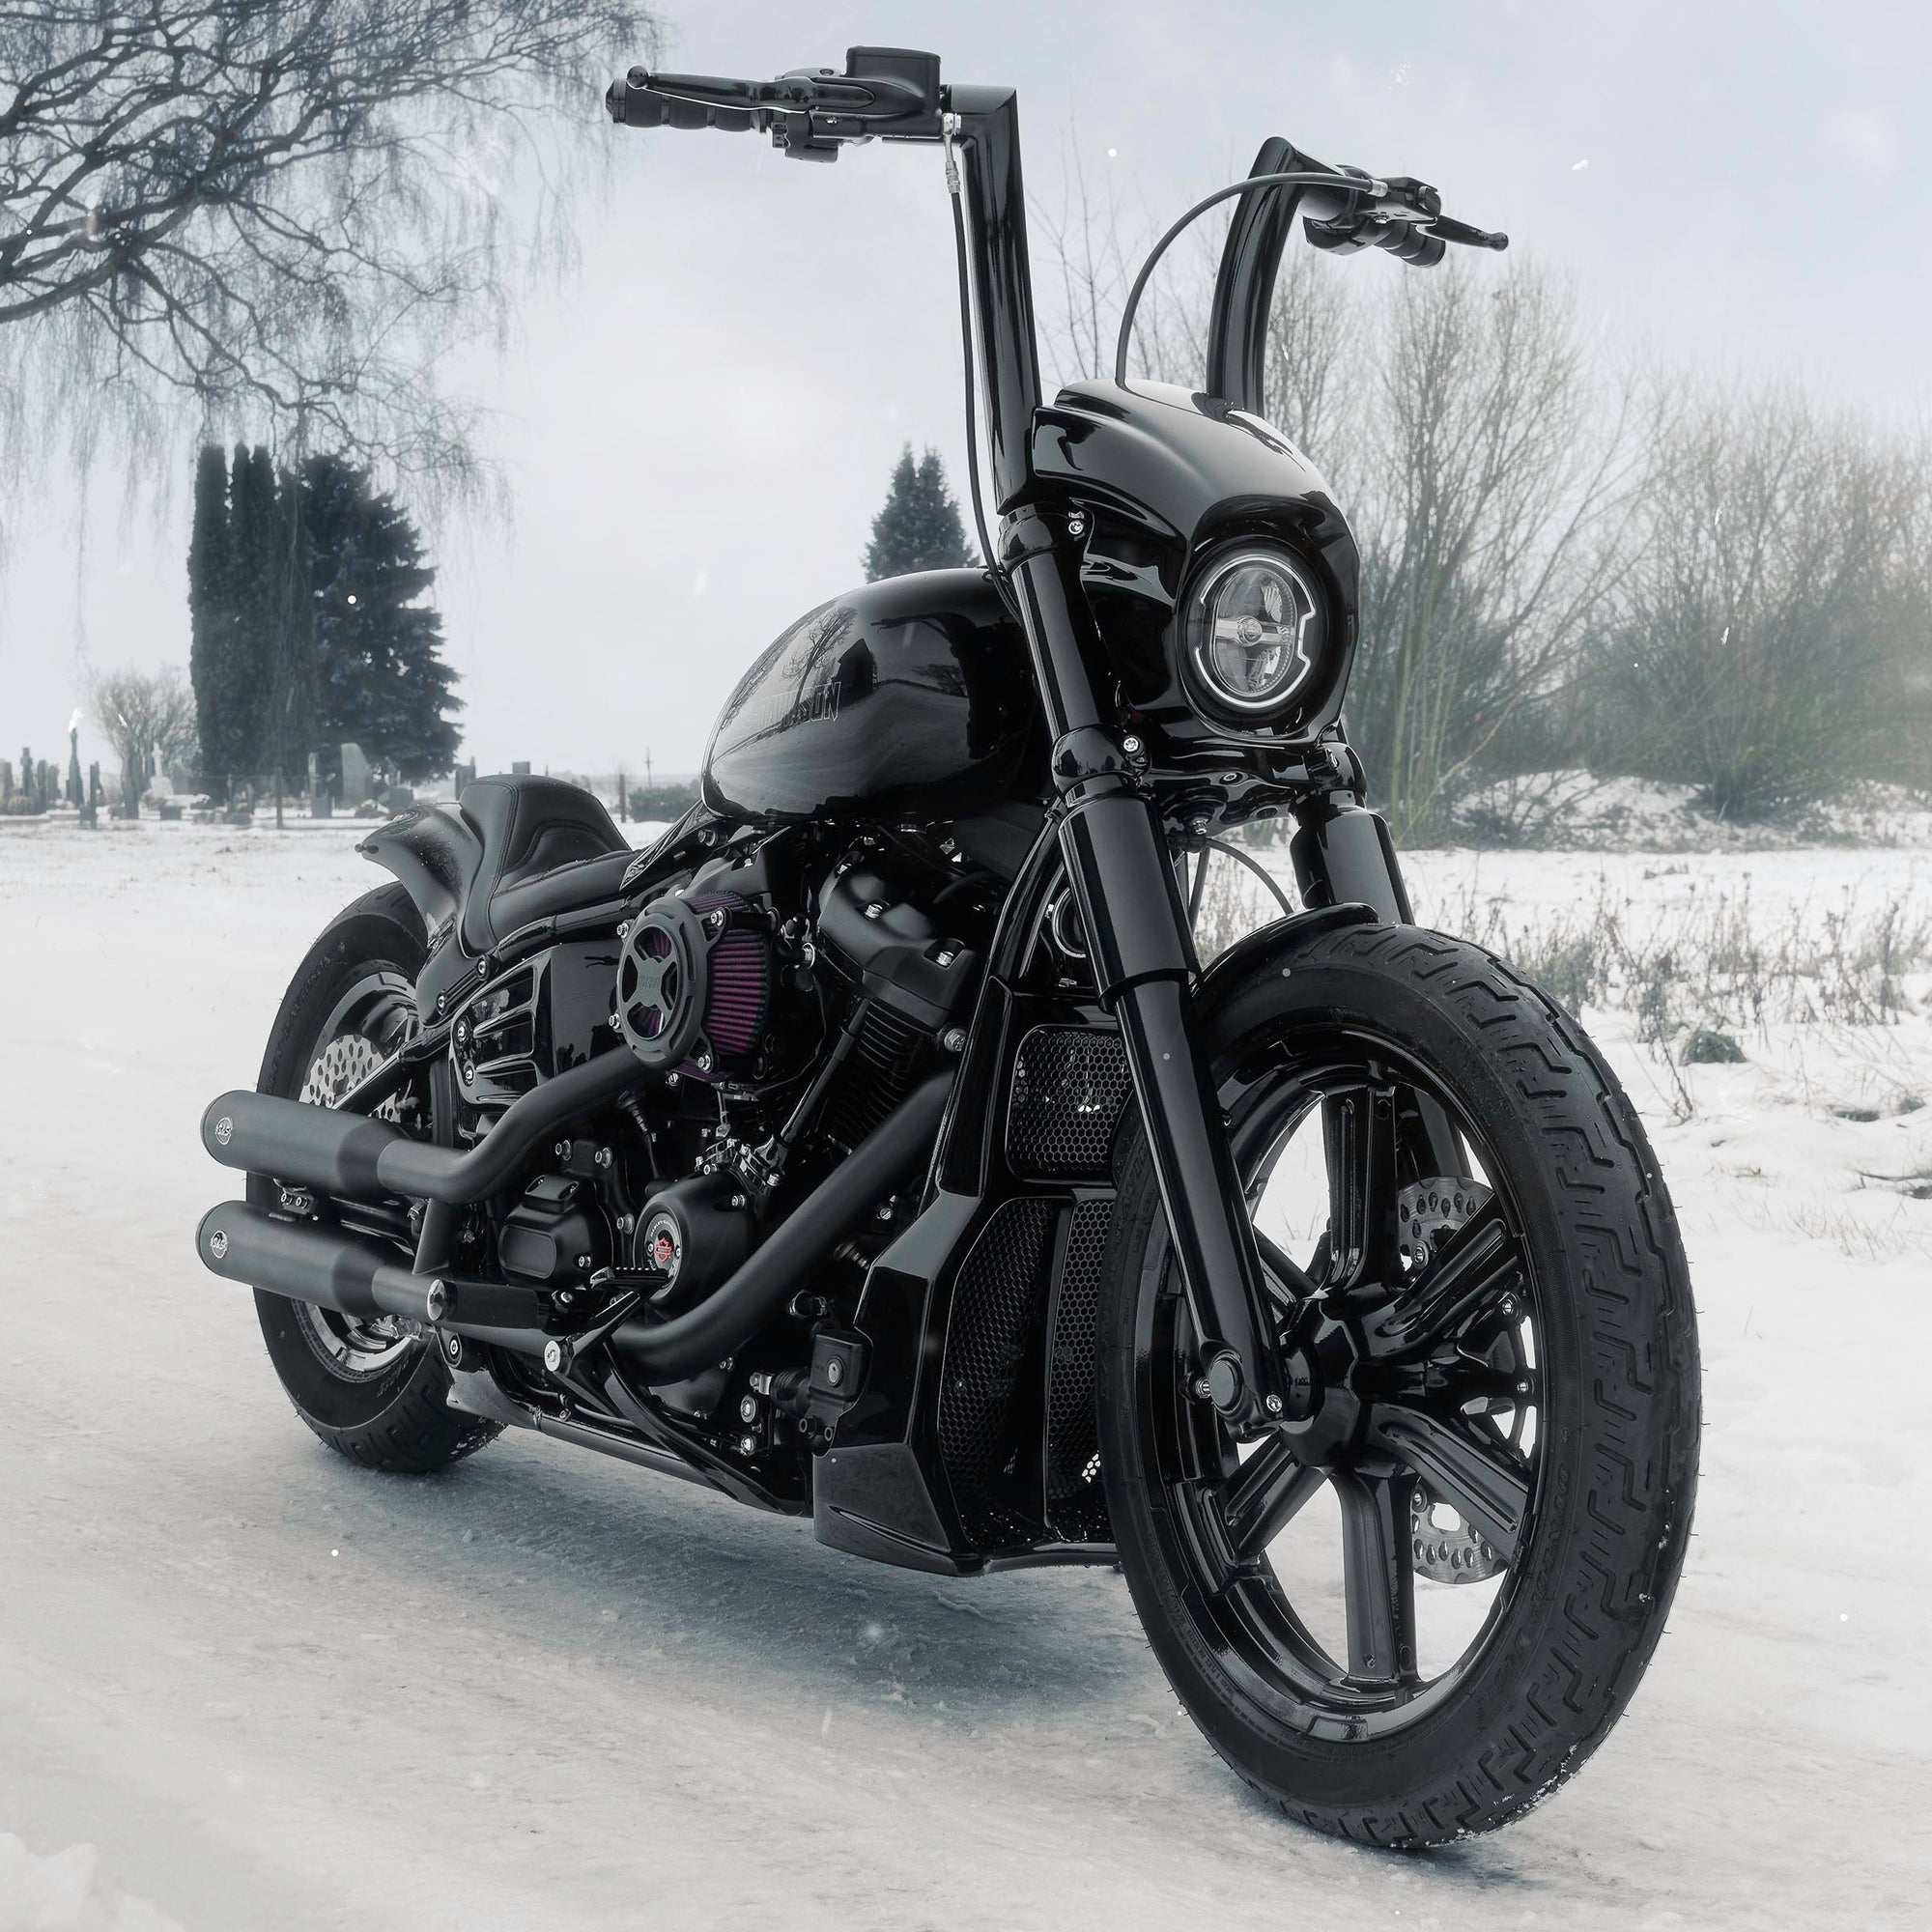 Modified Harley Davidson Softail motorcycle with Killer Custom parts from the front outside on a snowy day with some trees in the background